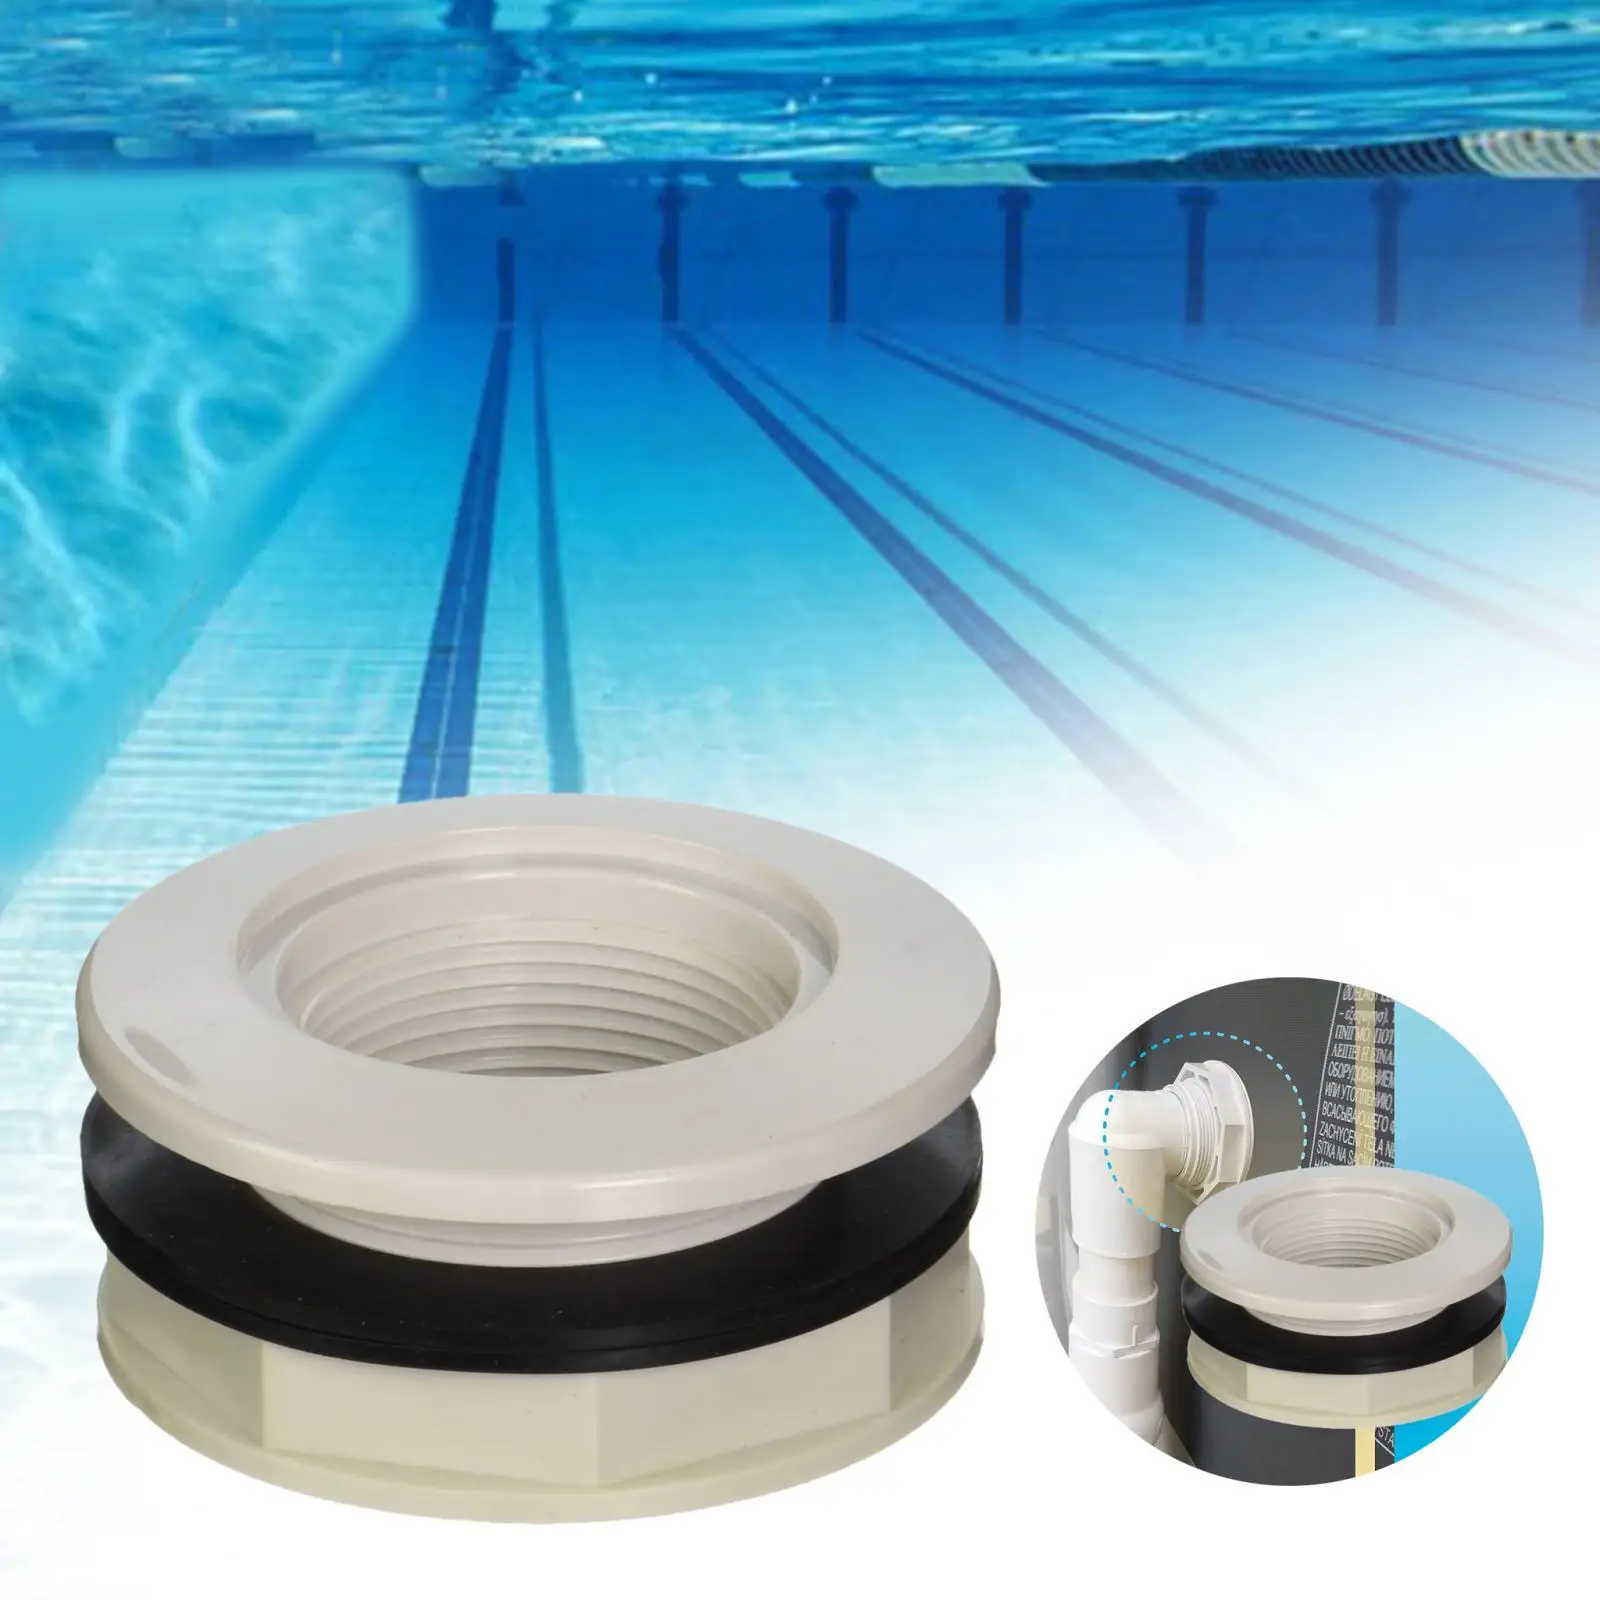 Fip Inlet Return Fitting Directional Flow Inlet Fitting 1.5`` Opening Directional Flow Inlet Fitting for Pool Accessories